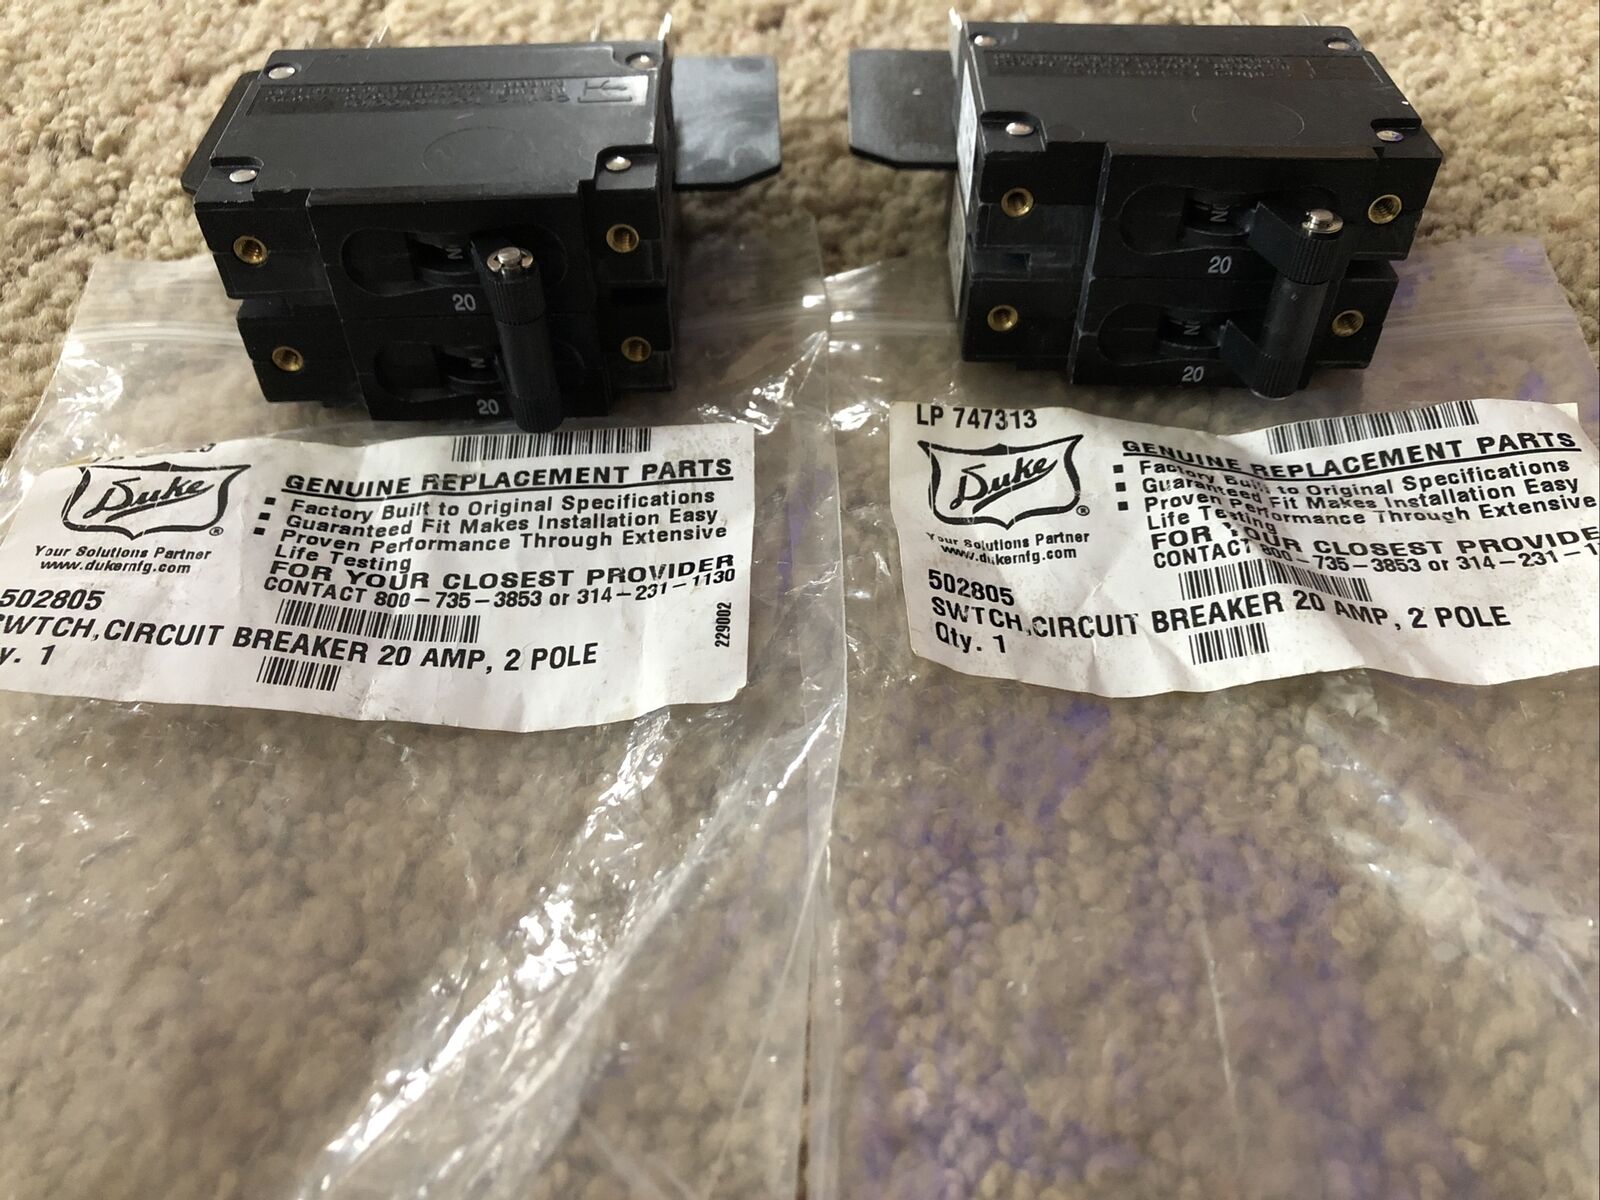 2) Duke Circuit Breaker Switch 20amp 2 Pole Genuine Replacement Pair Ships Free